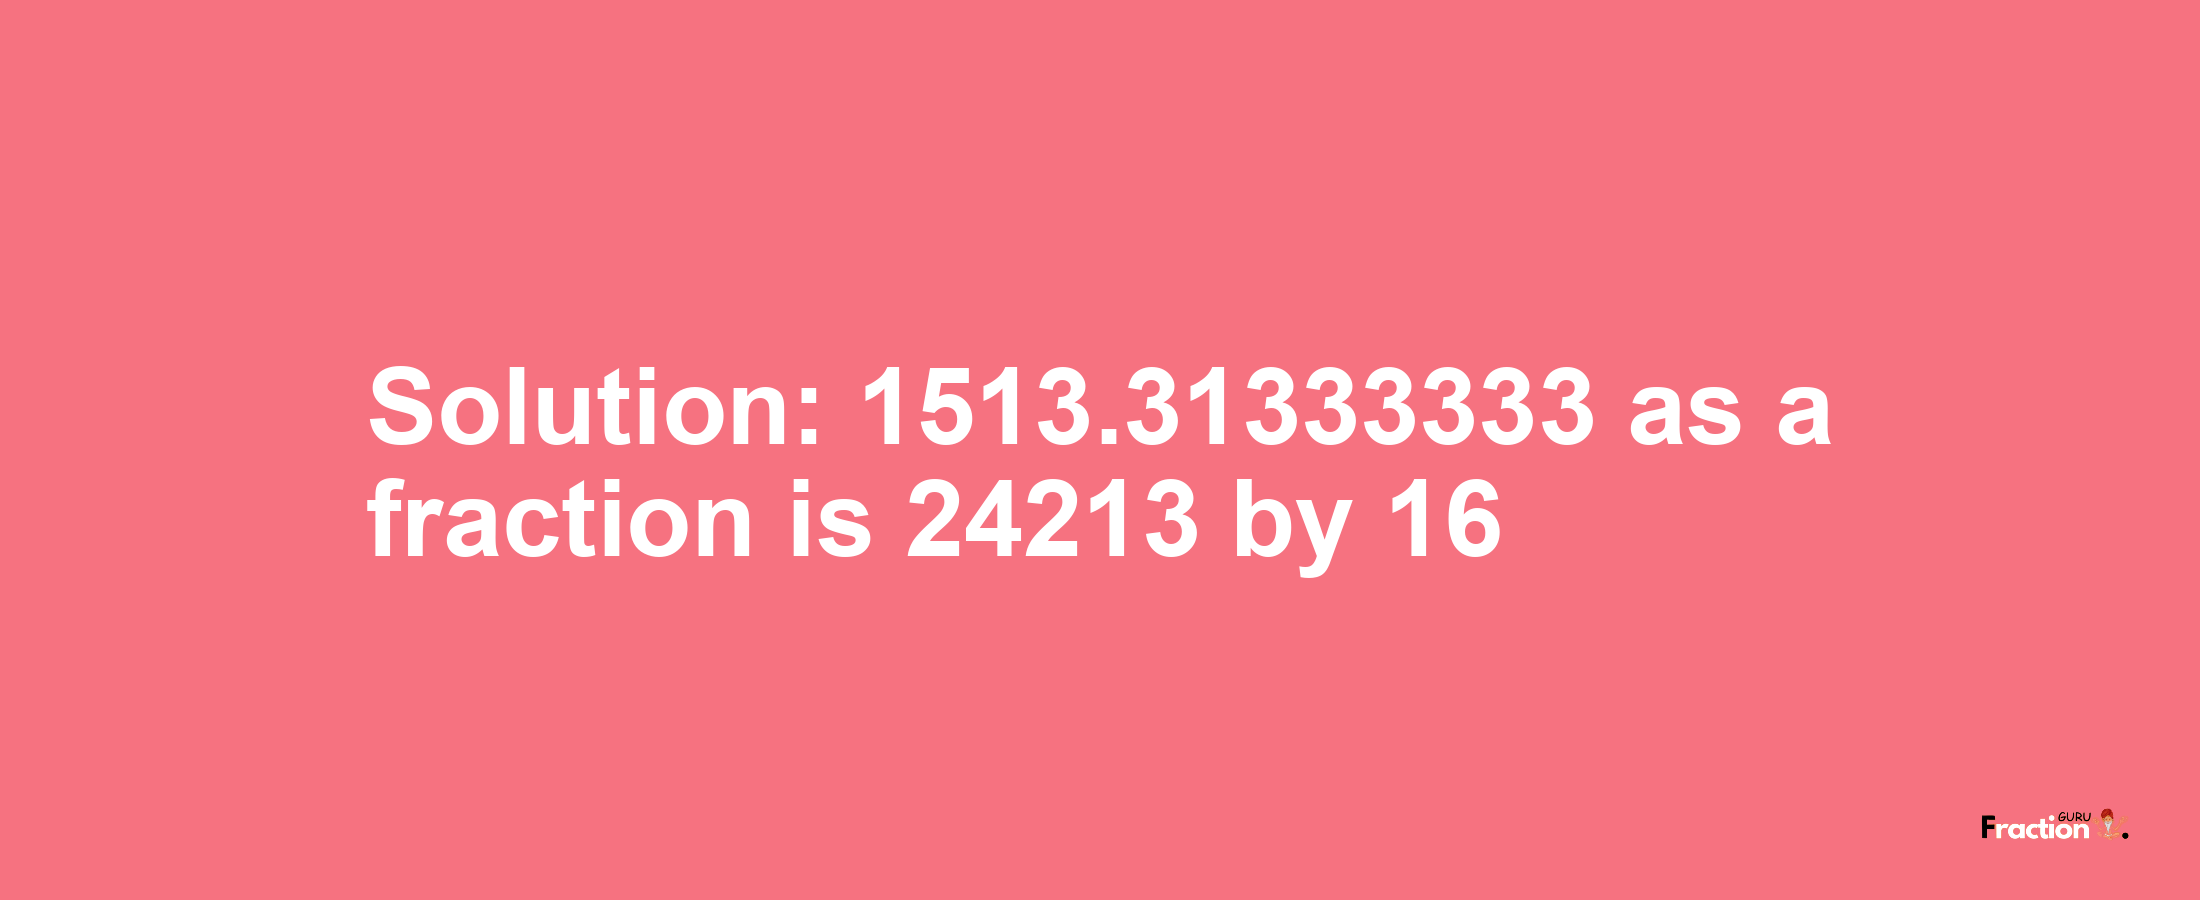 Solution:1513.31333333 as a fraction is 24213/16